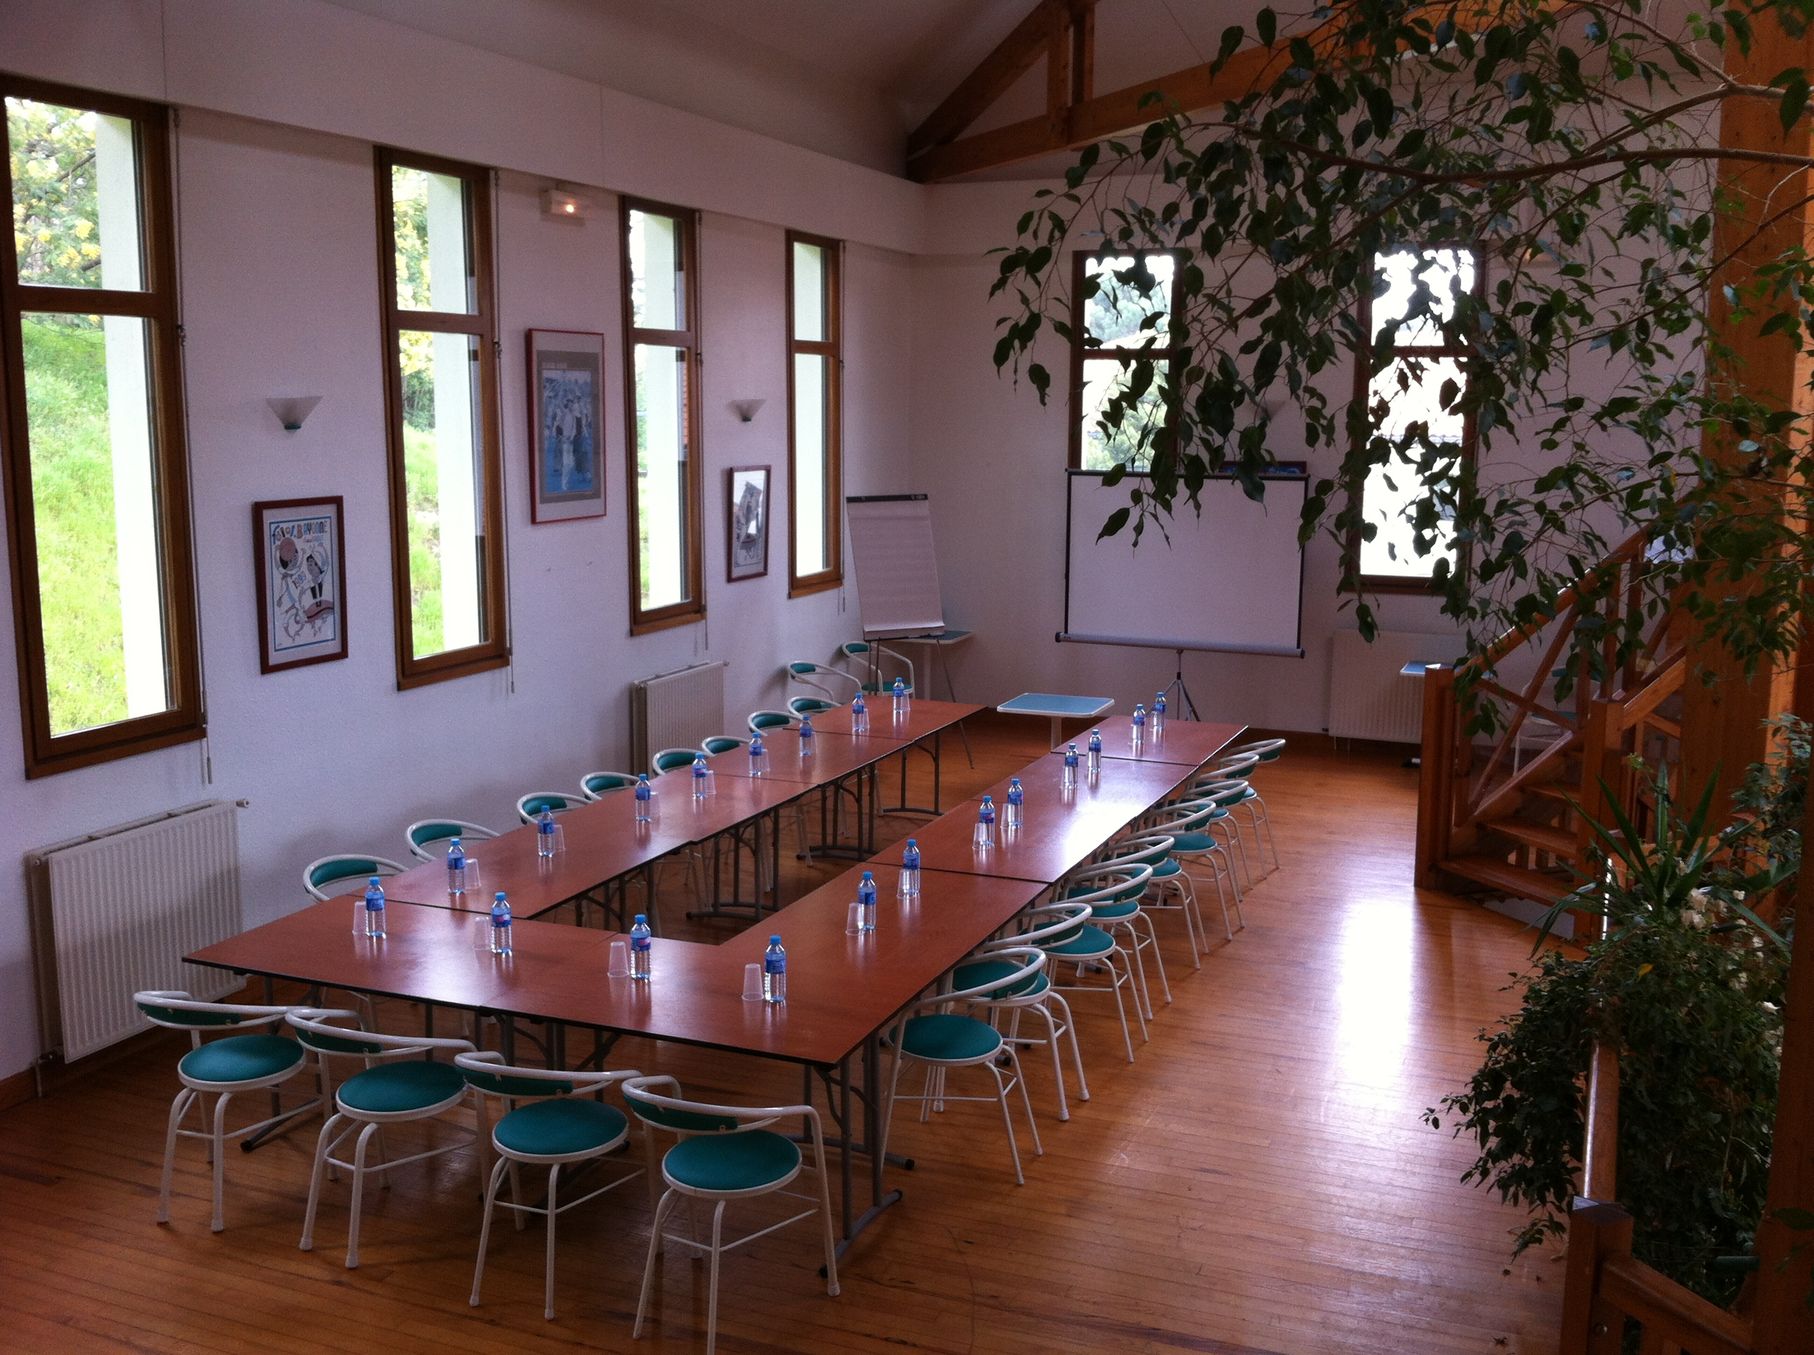 Our meeting and seminar room